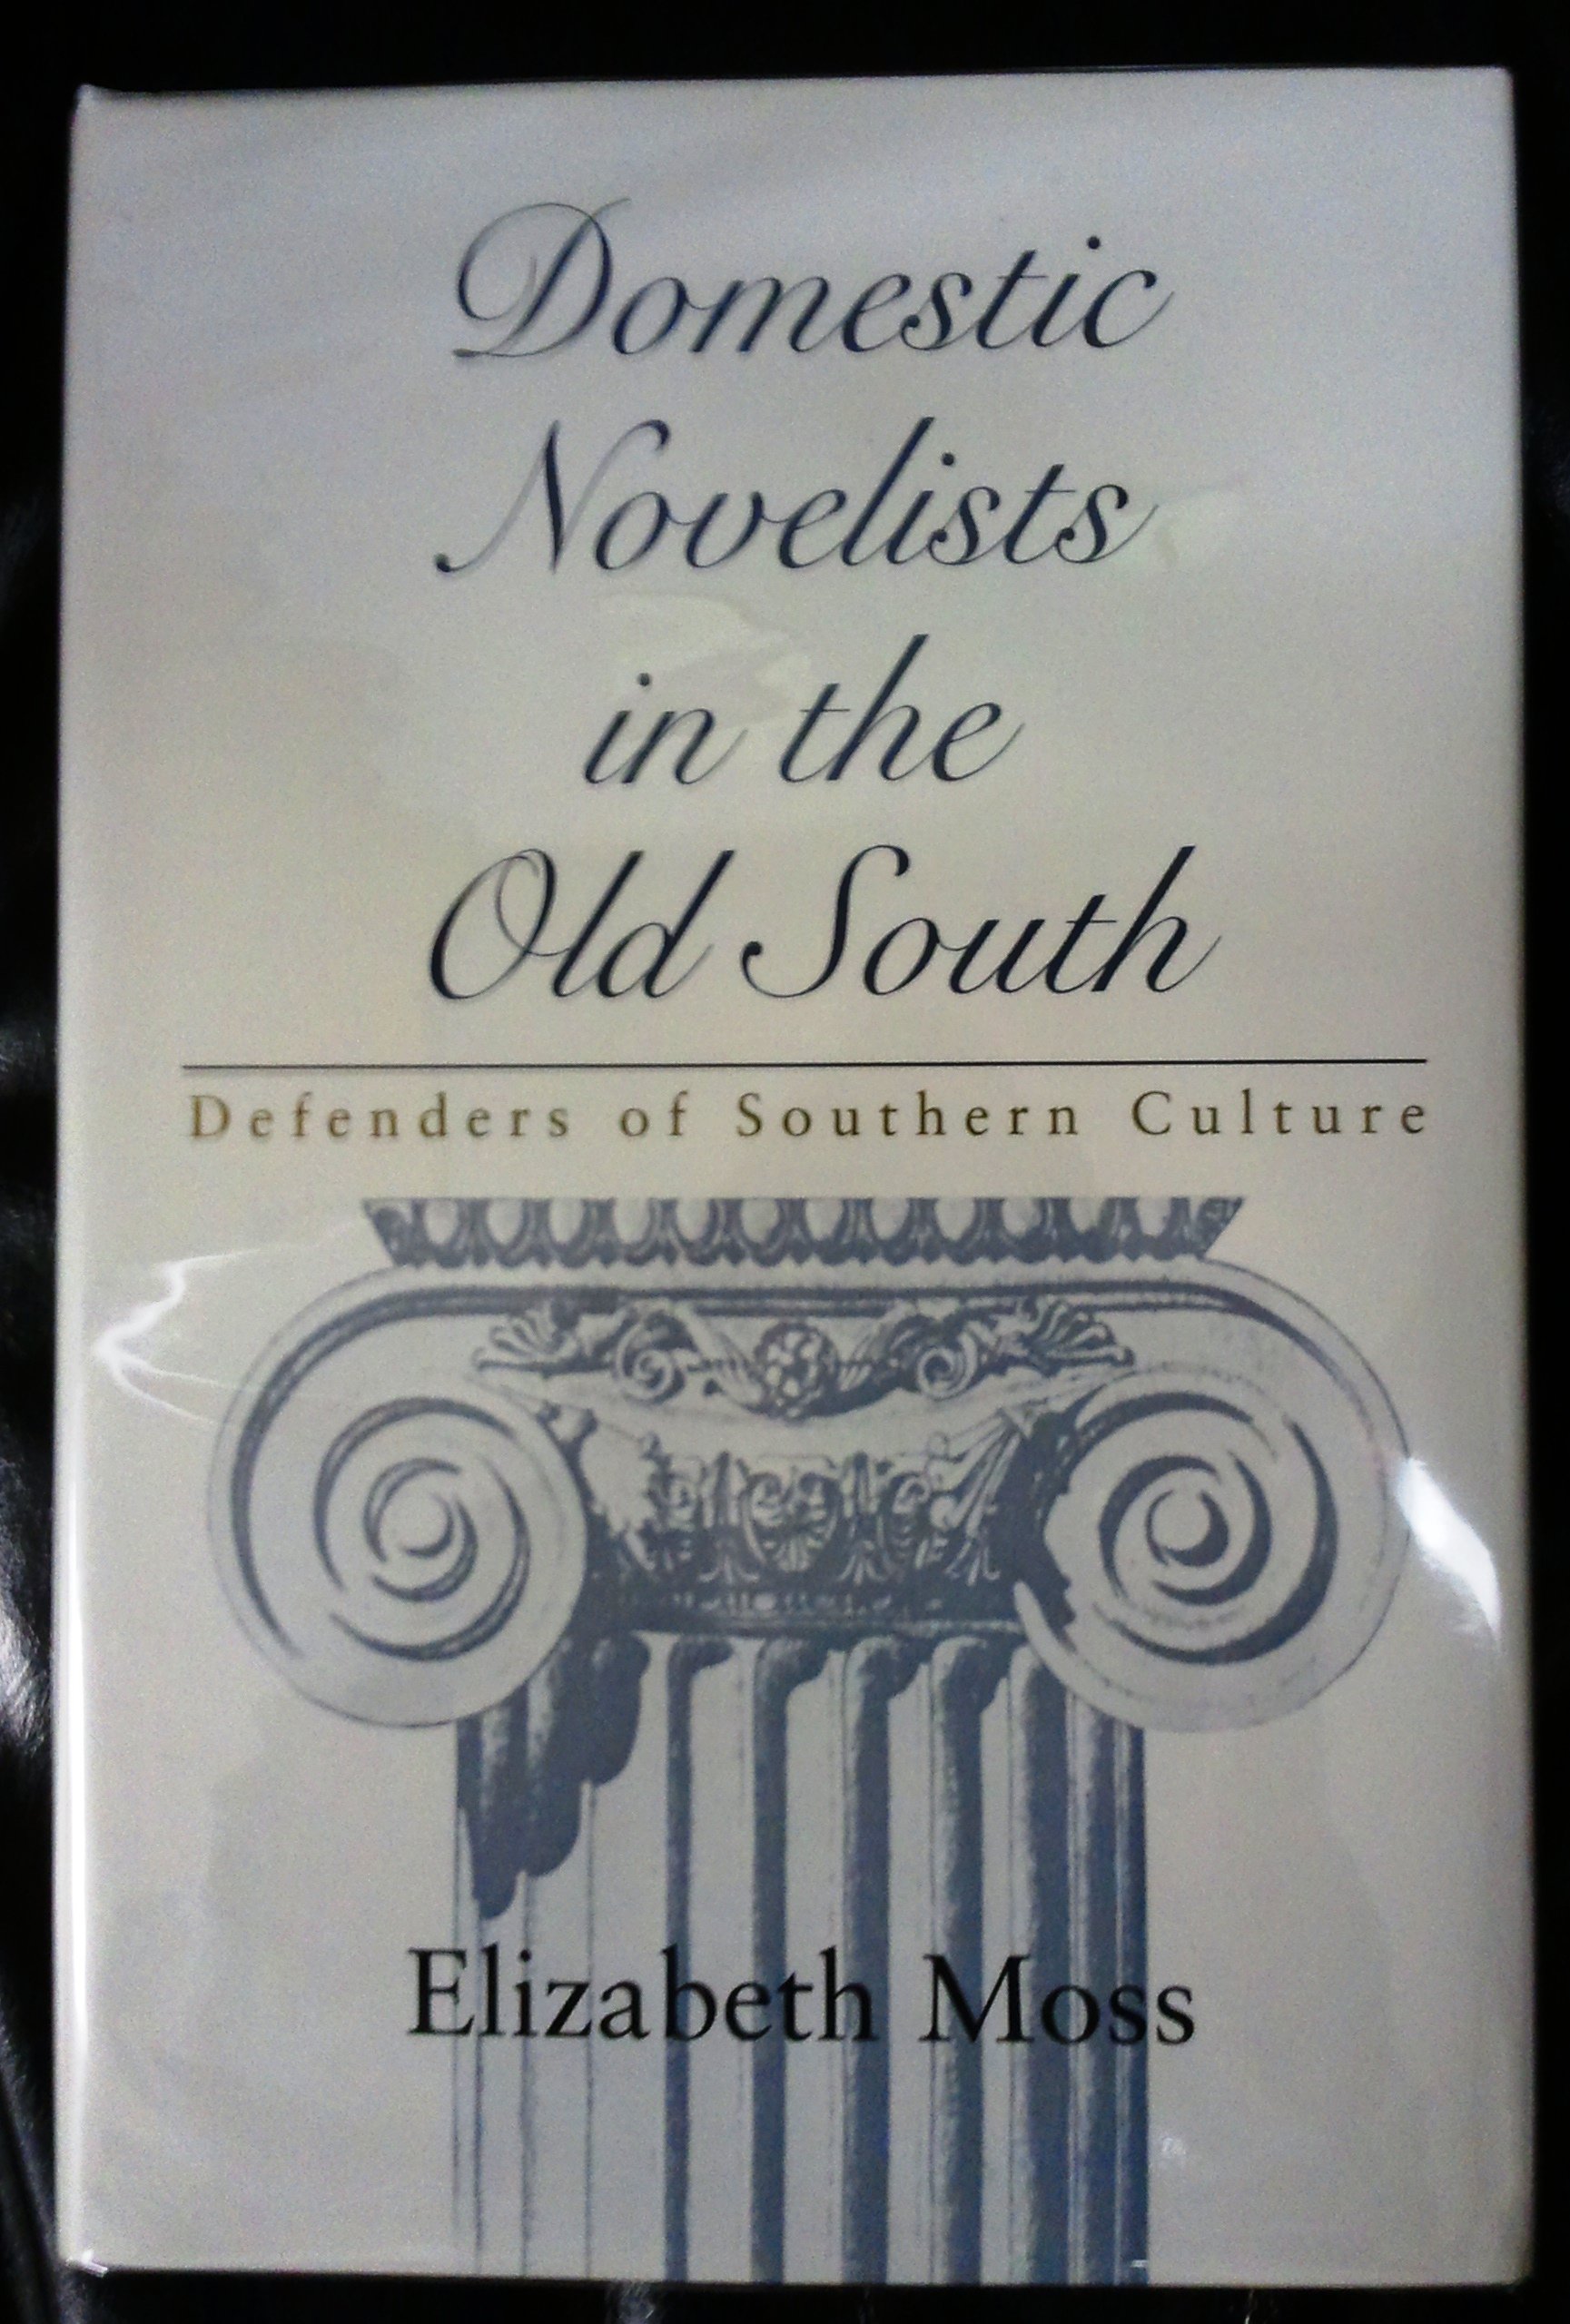 Domestic novelists in the Old South magazine reviews